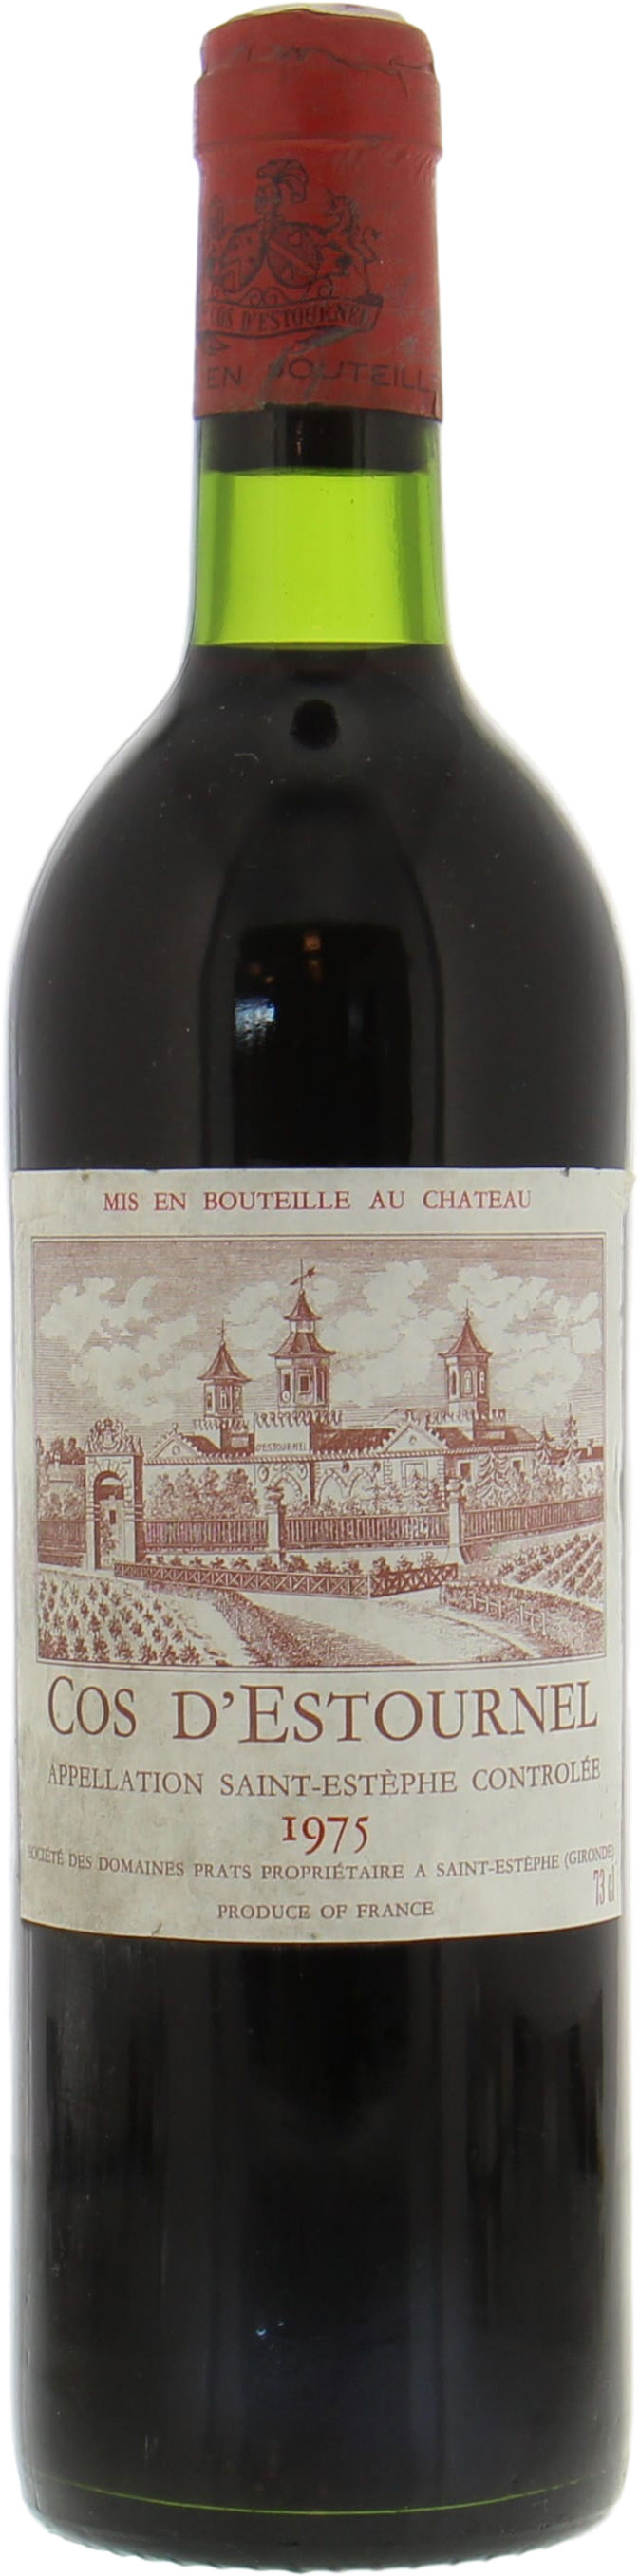 Chateau Cos D'Estournel - Chateau Cos D'Estournel 1975 Base of neck or better